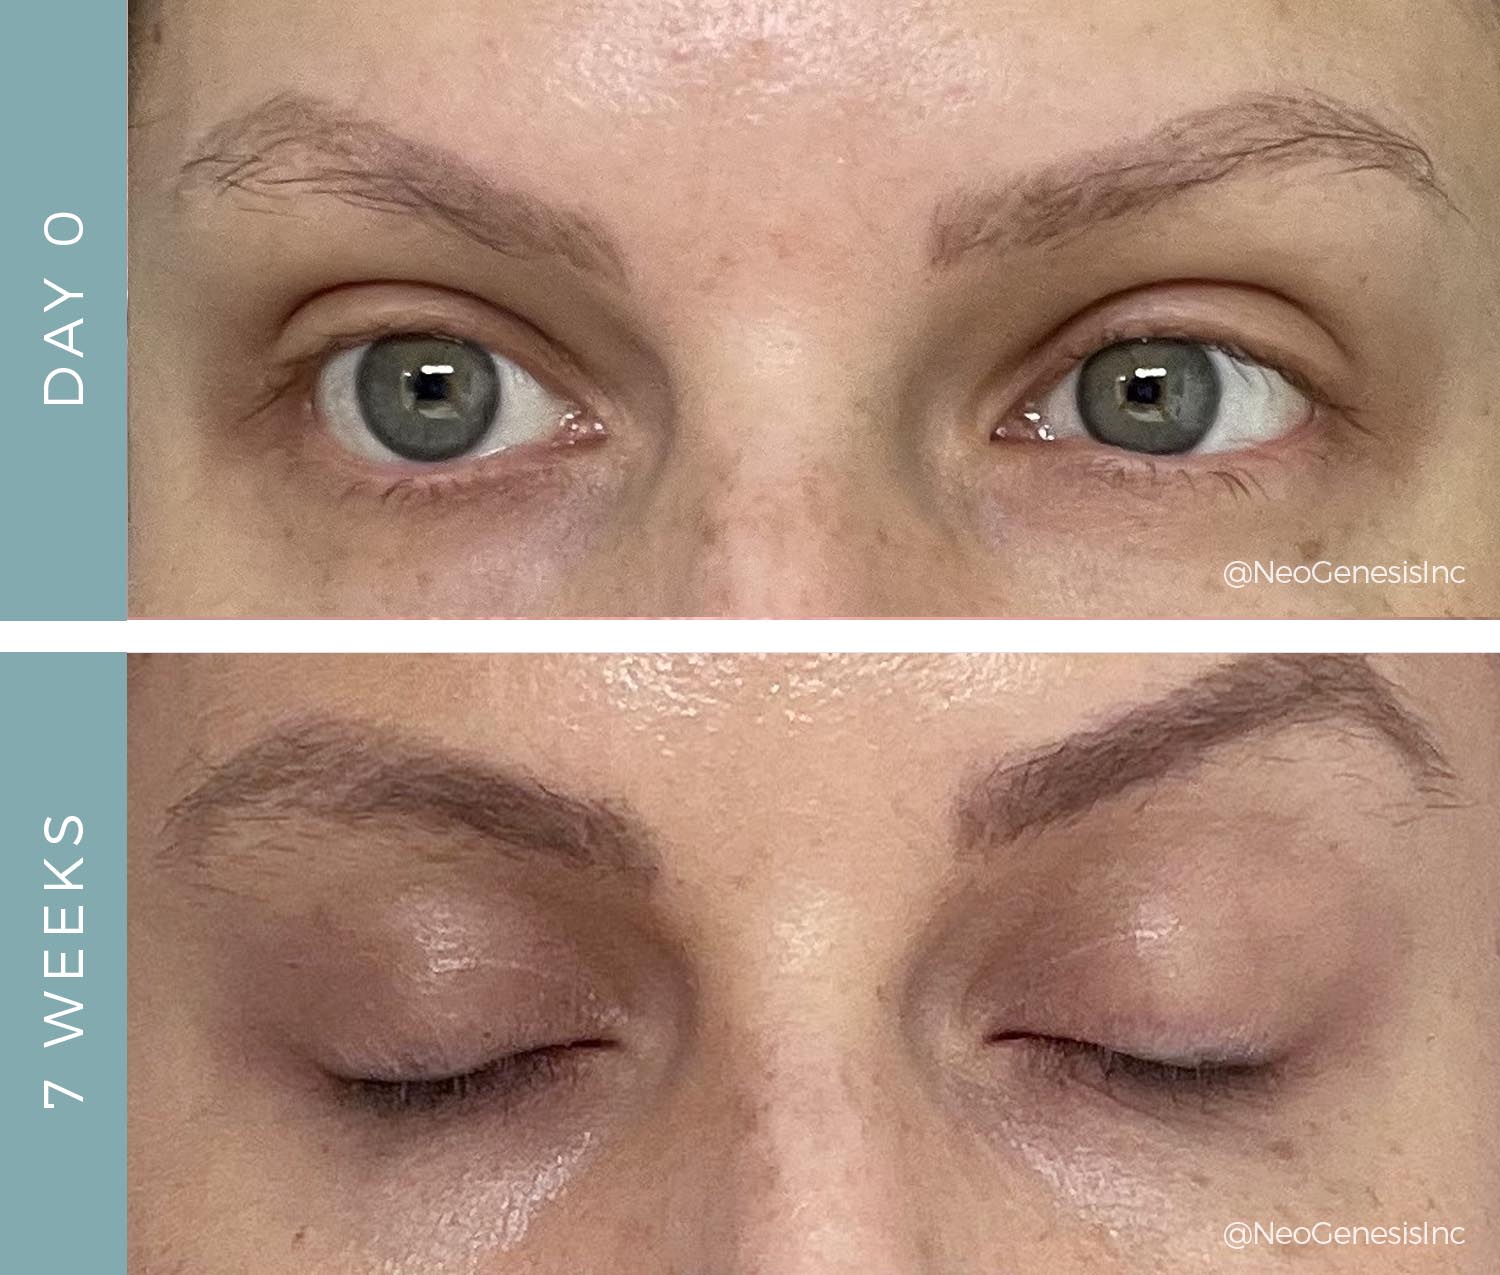 Chemo side effects - Lash + Brow loss - Before + After